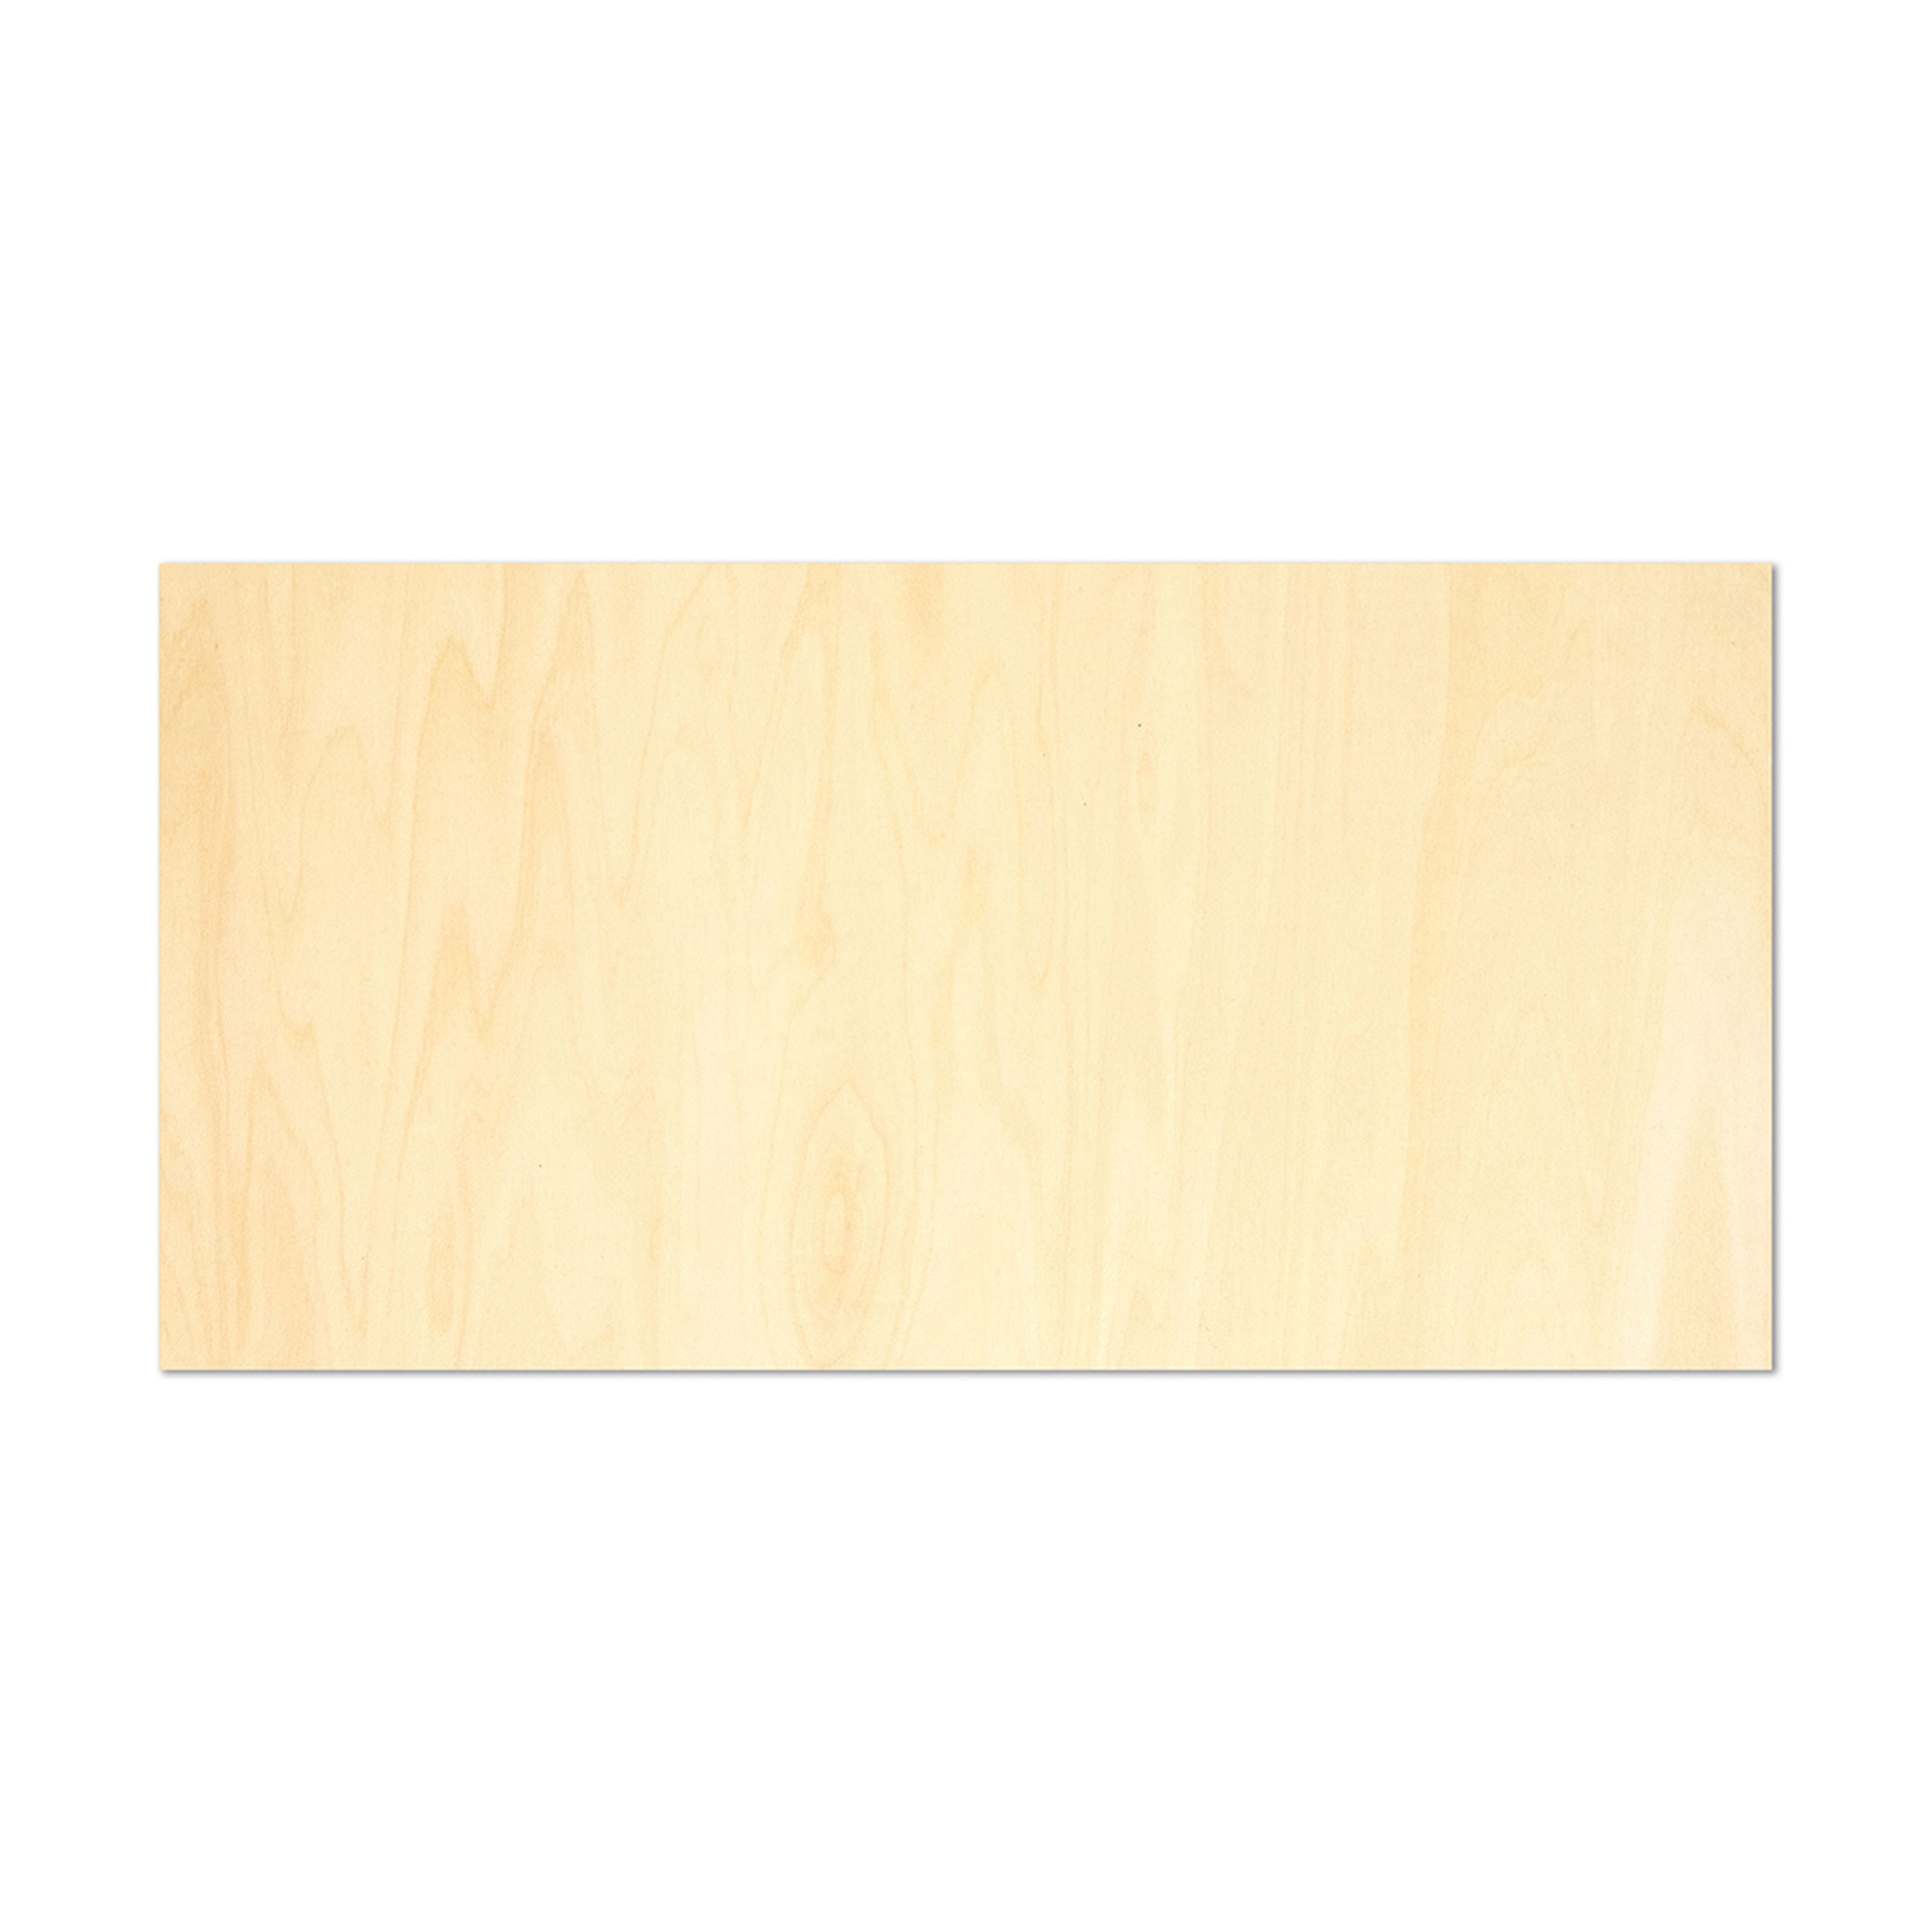 Basswood 1/8 Inch Solid Hardwood 8 Sheets Glowforge Ready, 6x19 Inch, 1/8  Inch, Finished 